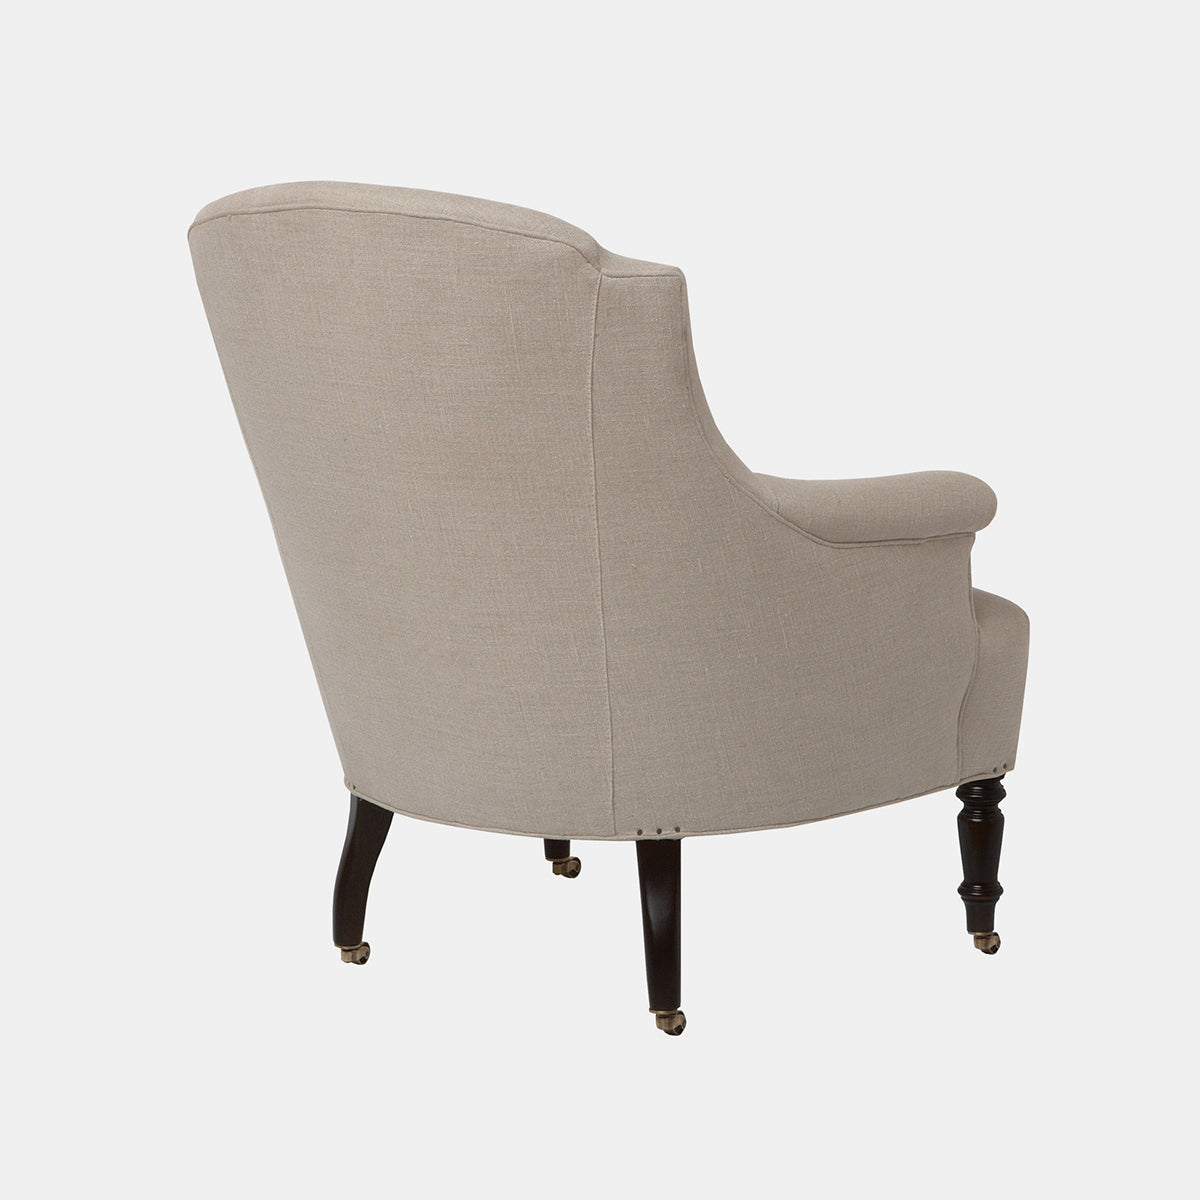 John Derian Tulip Chair in Vintage Flax 100% Linen in stock at Collyer's Mansion